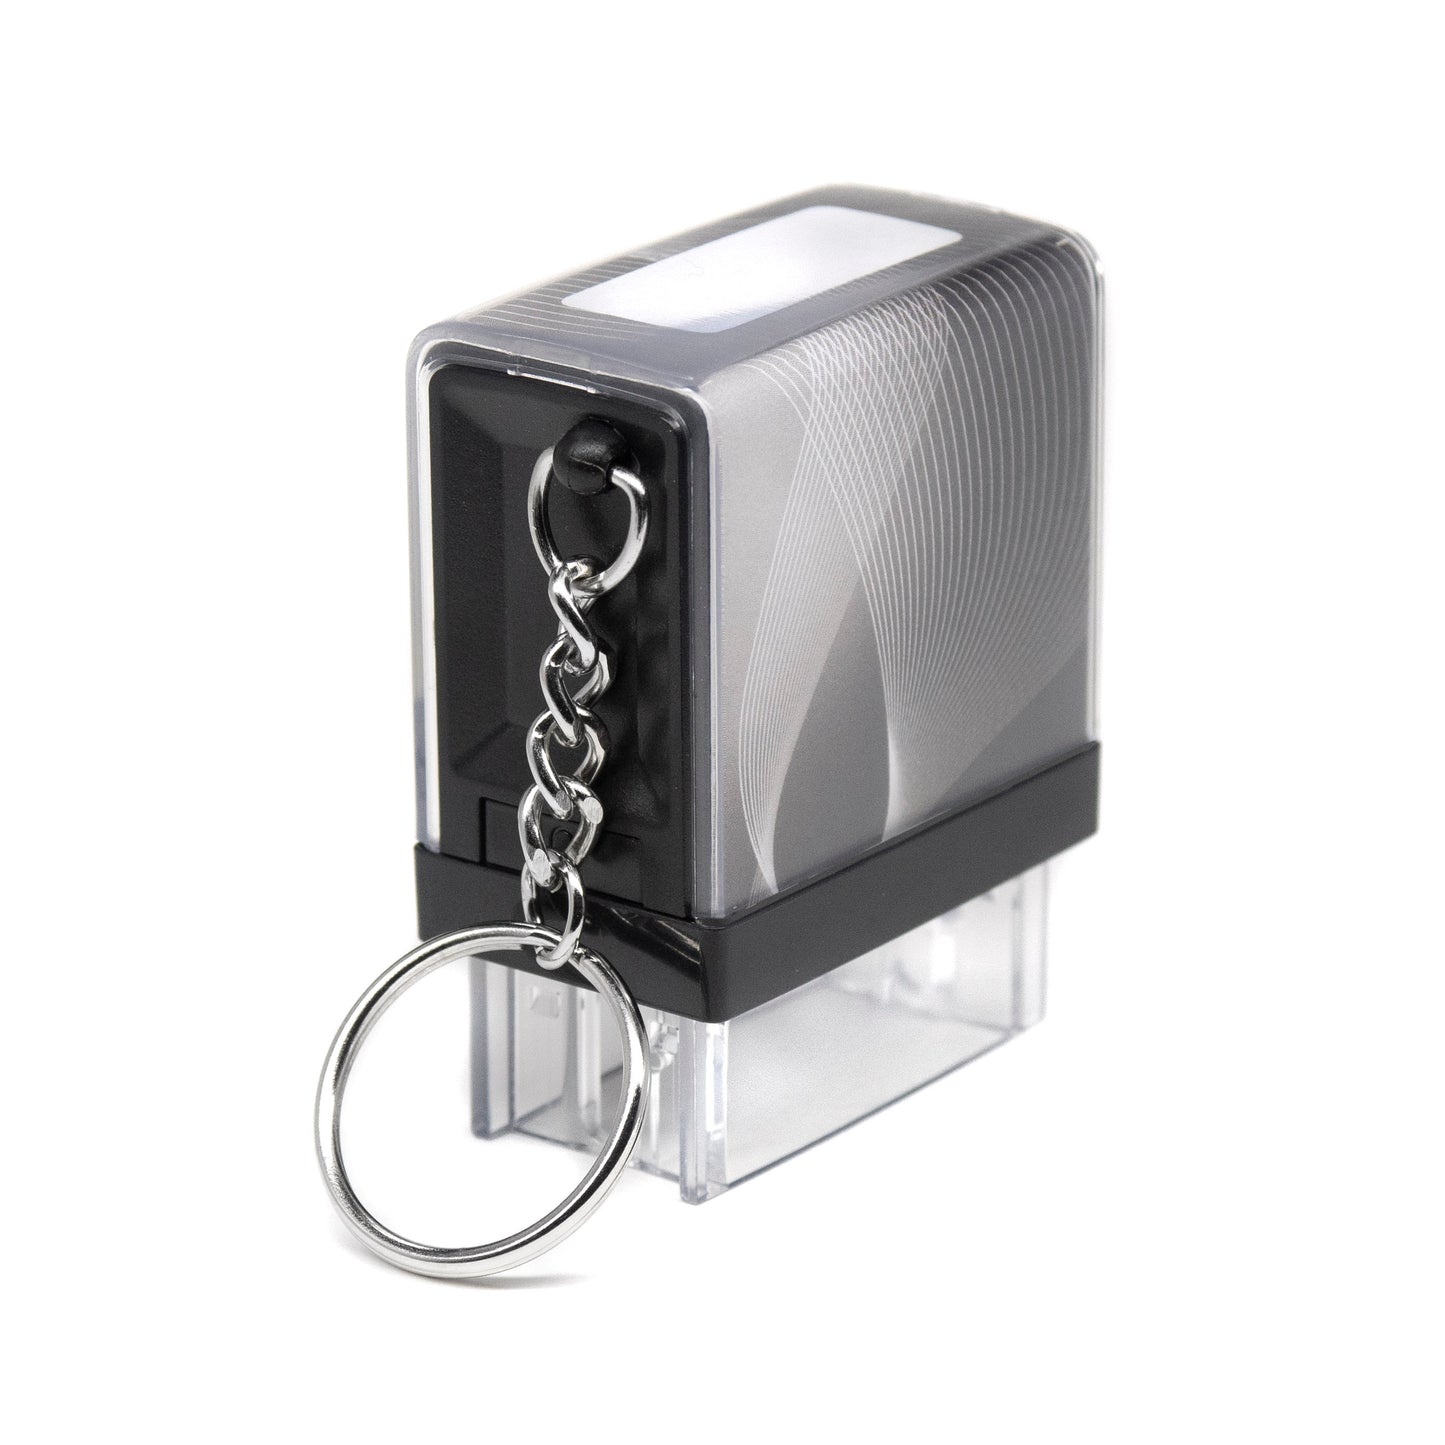 26mm x 9mm - Self-inking Personalised Keyring Key Ring Rubber Stamp With Black Ink - Two Lines Of Text